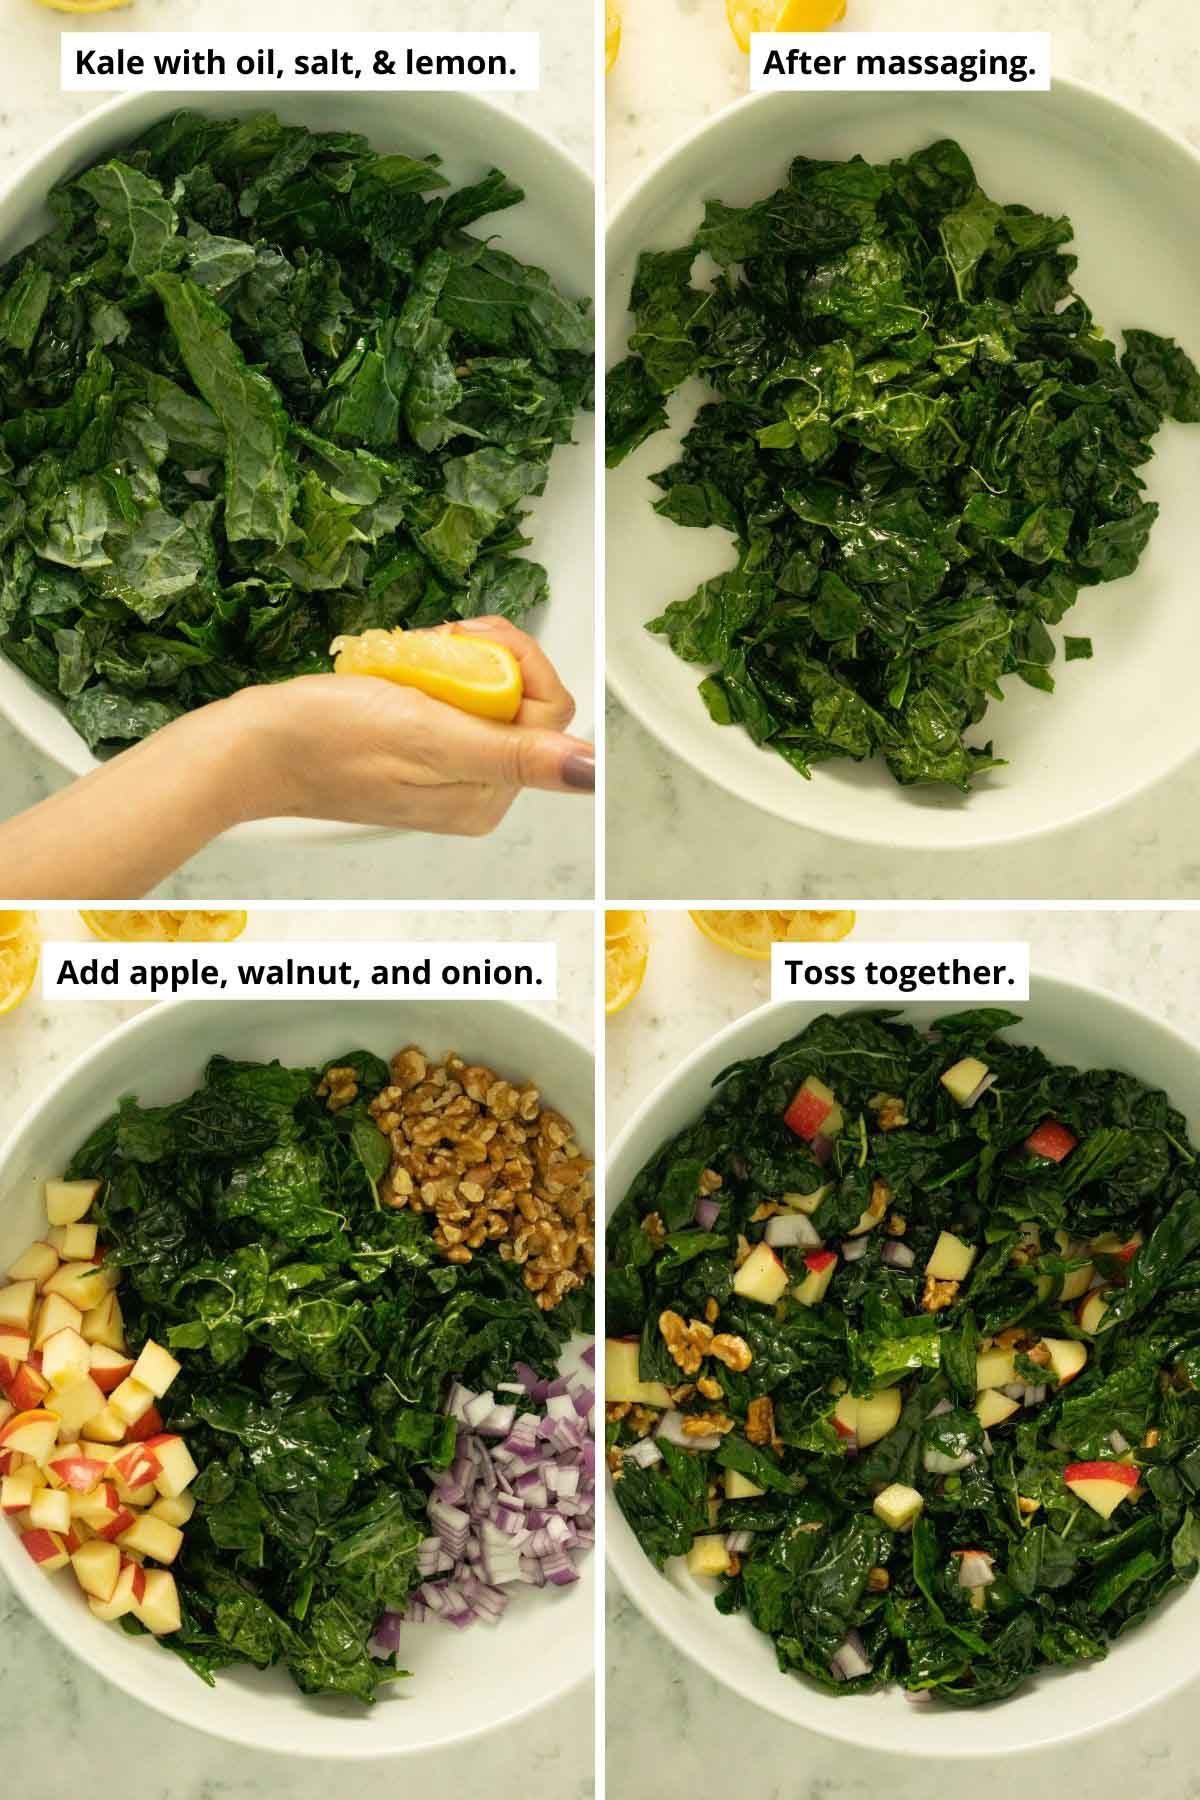 image collage showing adding lemon to the kale, massaged kale, adding the other salad ingredients and the salad after tossing